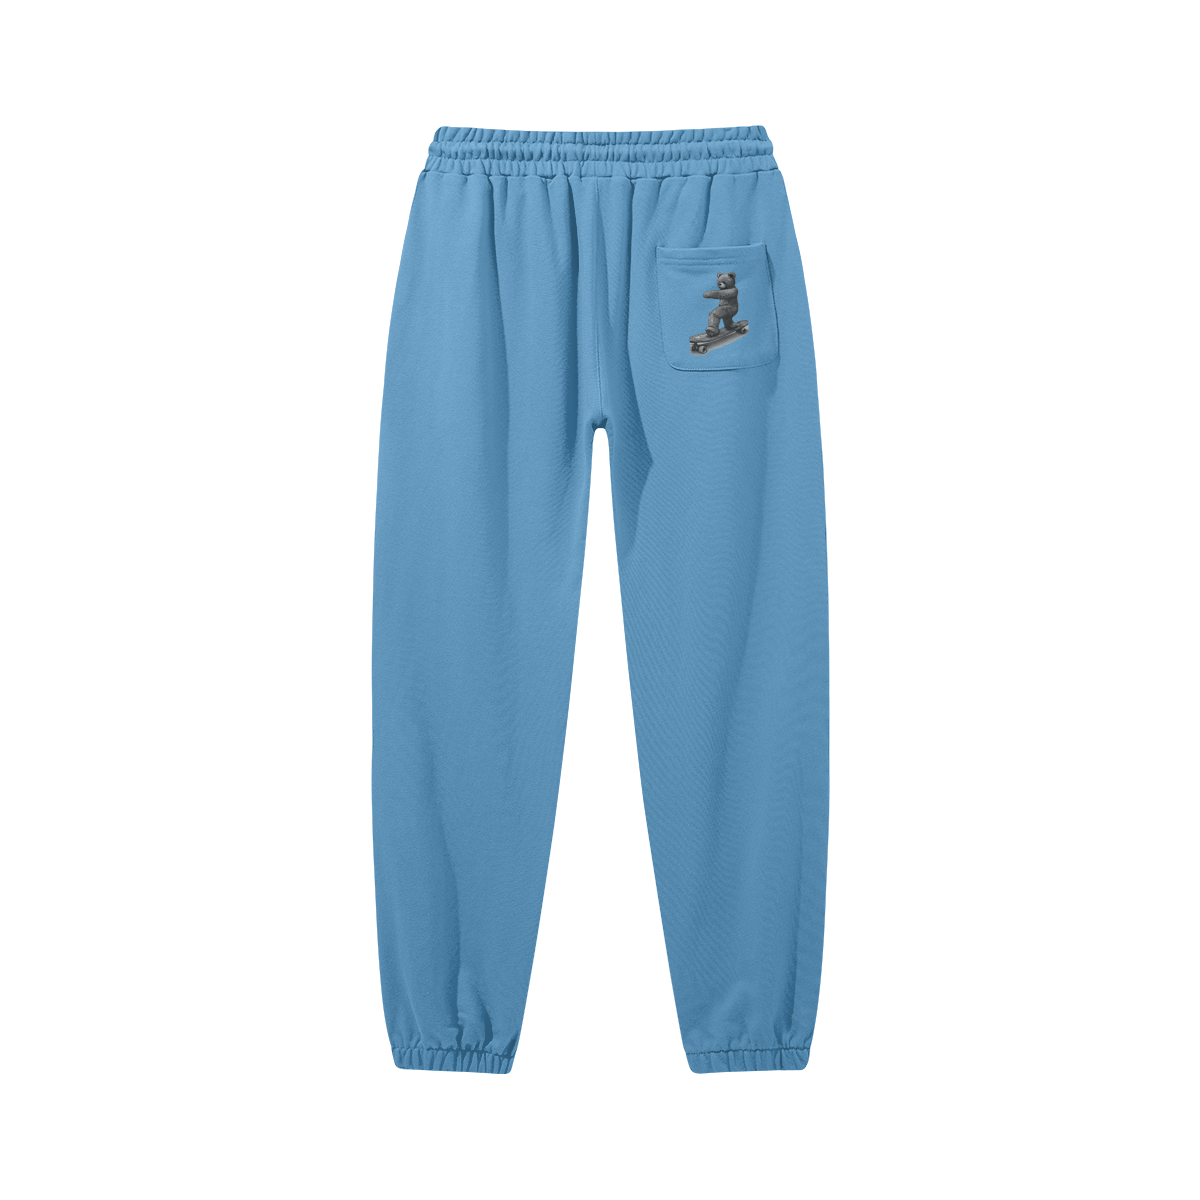 Pastel Blue - Teddy Ride Shred 380GSM Unisex Heavyweight Baggy Sweatpants - unisex sweatpants at TFC&H Co.